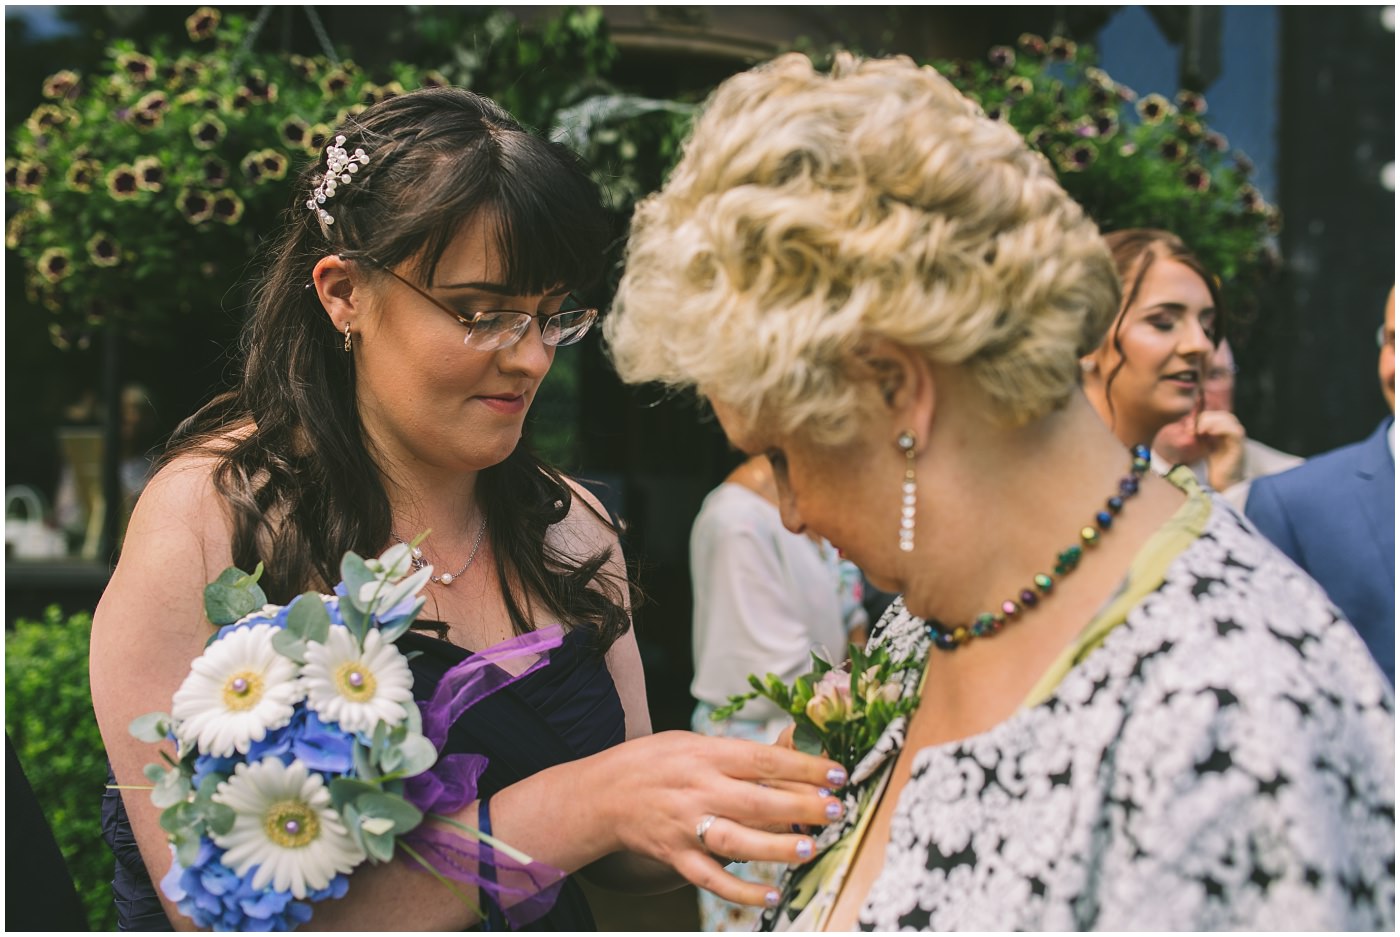 button hole being applied by a bridesmaid